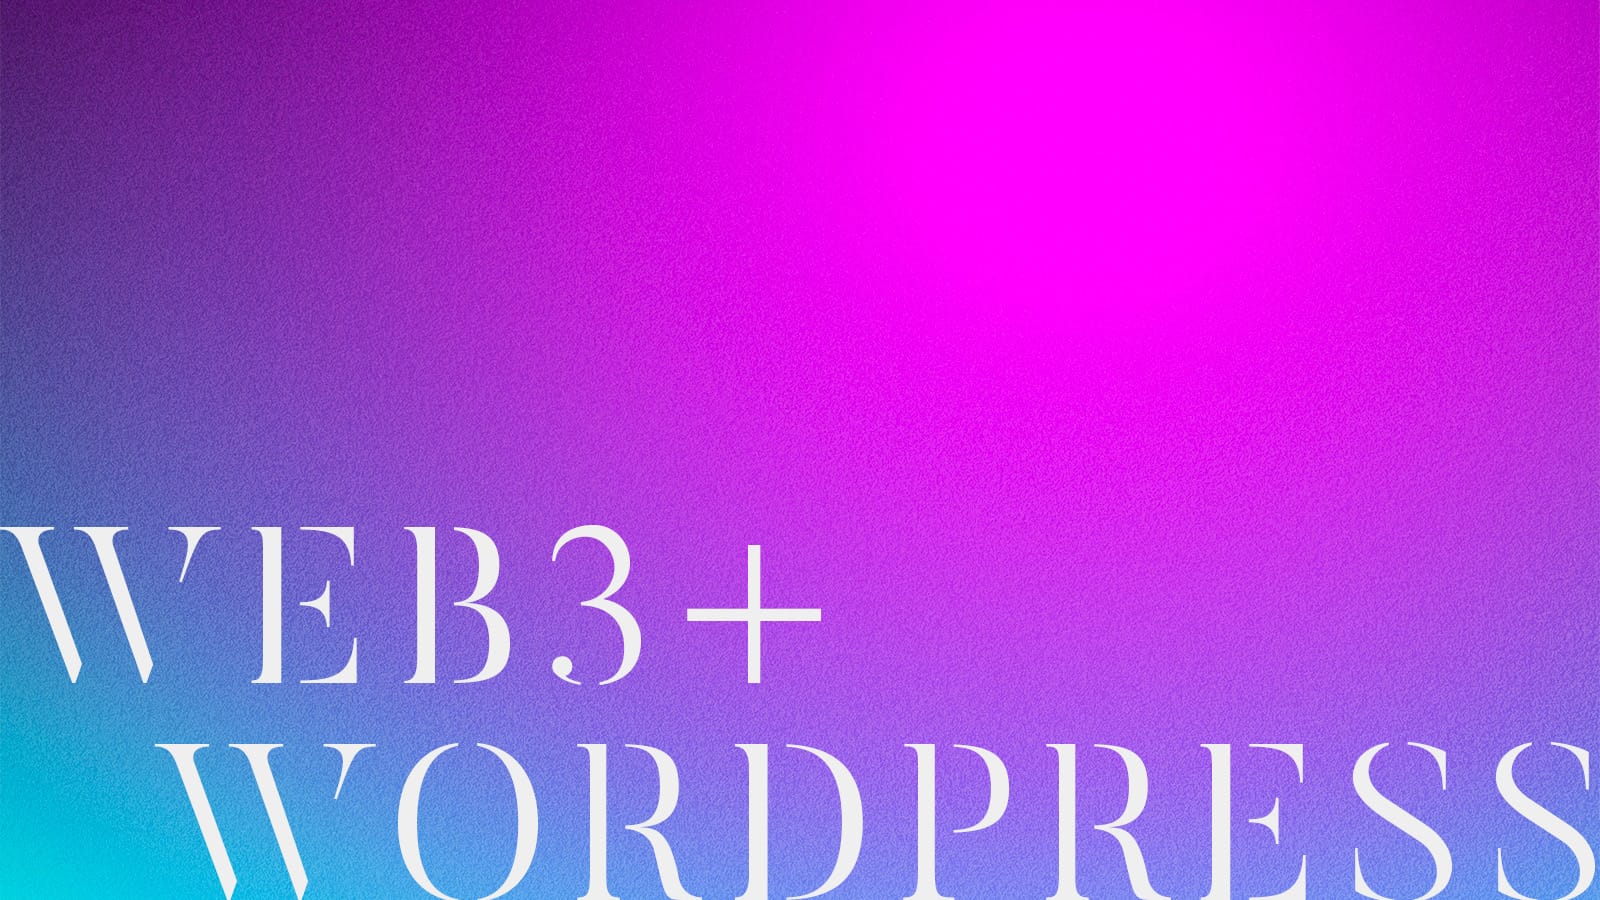 An insight into the potential future for  Web3 and WordPress?